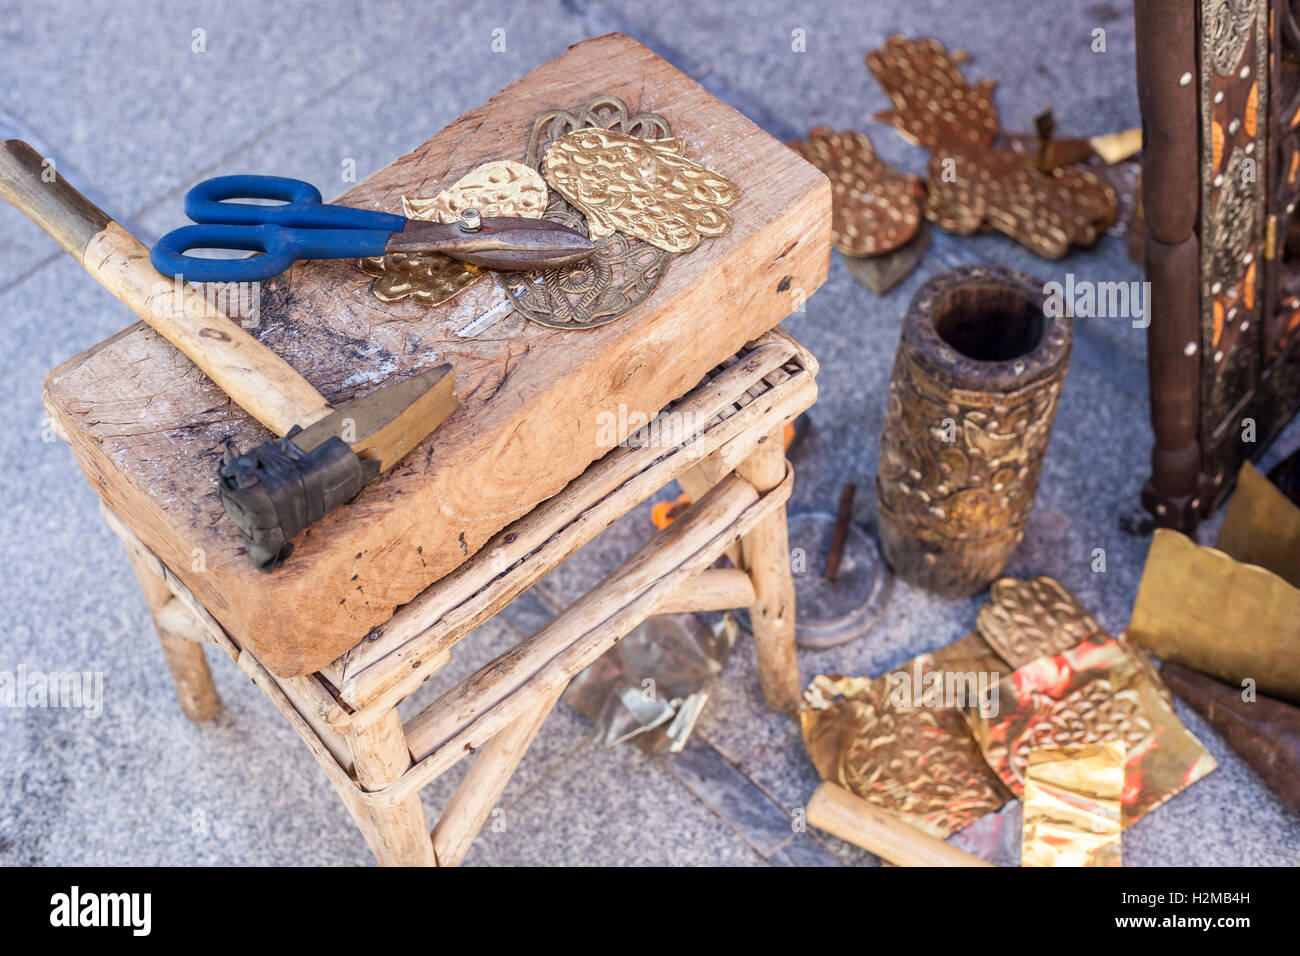 Craftsman bench with tools for engrave hamsa palm-shaped brass amulets Stock Photo